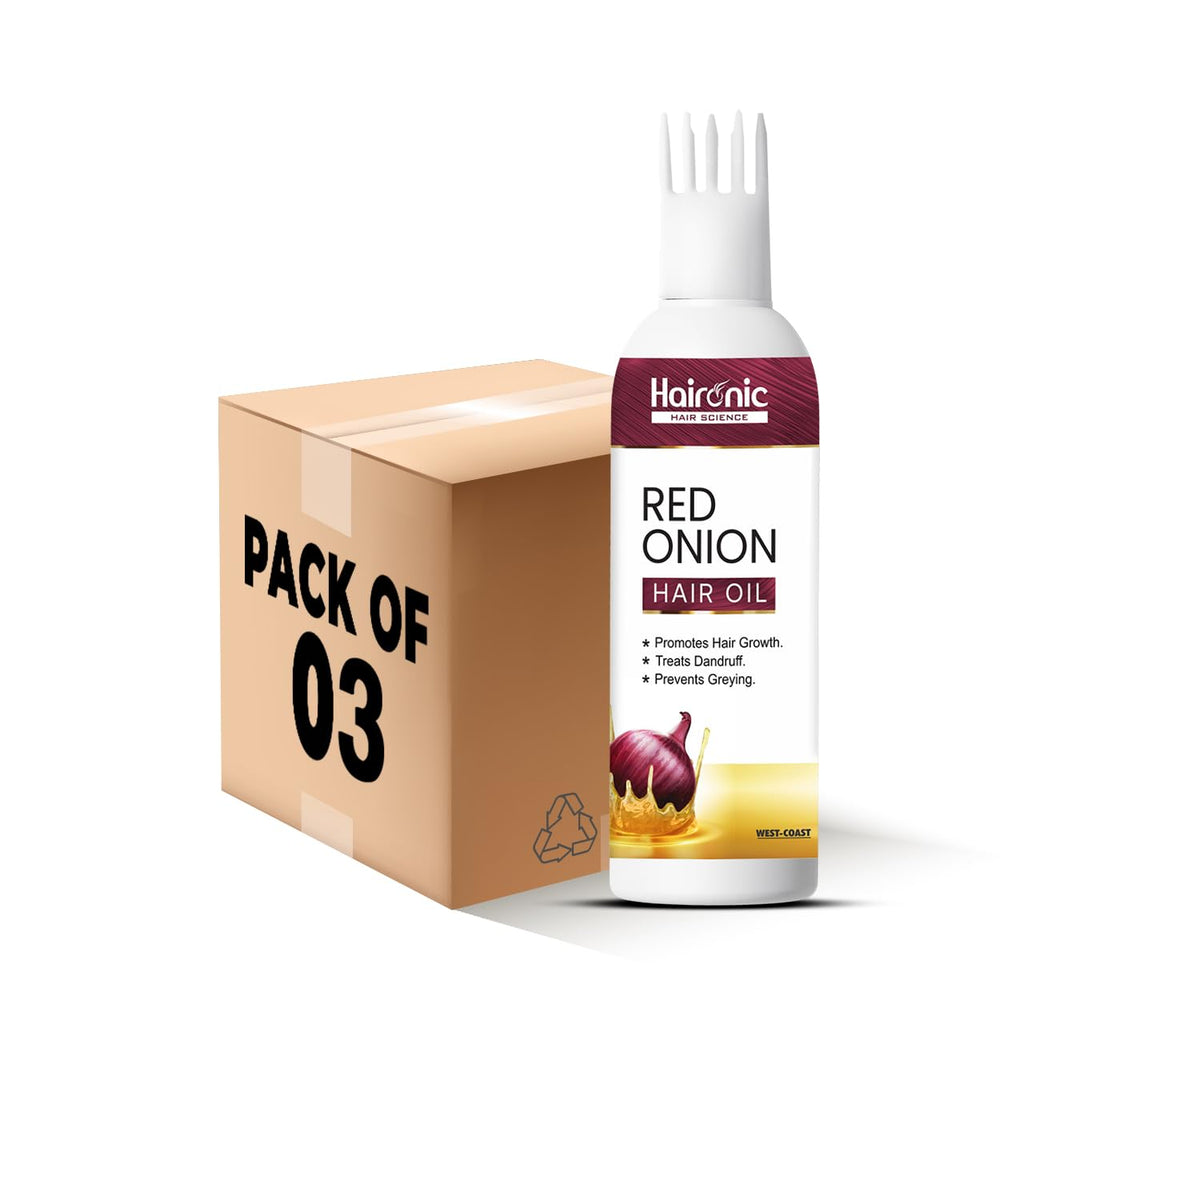 Haironic Hair Science Red Onion Oil- Anti Hair Loss, Nourishing Hair Treatment With Real Onion Extract - Intensive Hair Fall, Dandruff Control Hair Oil - 100ml (Pack of 3)